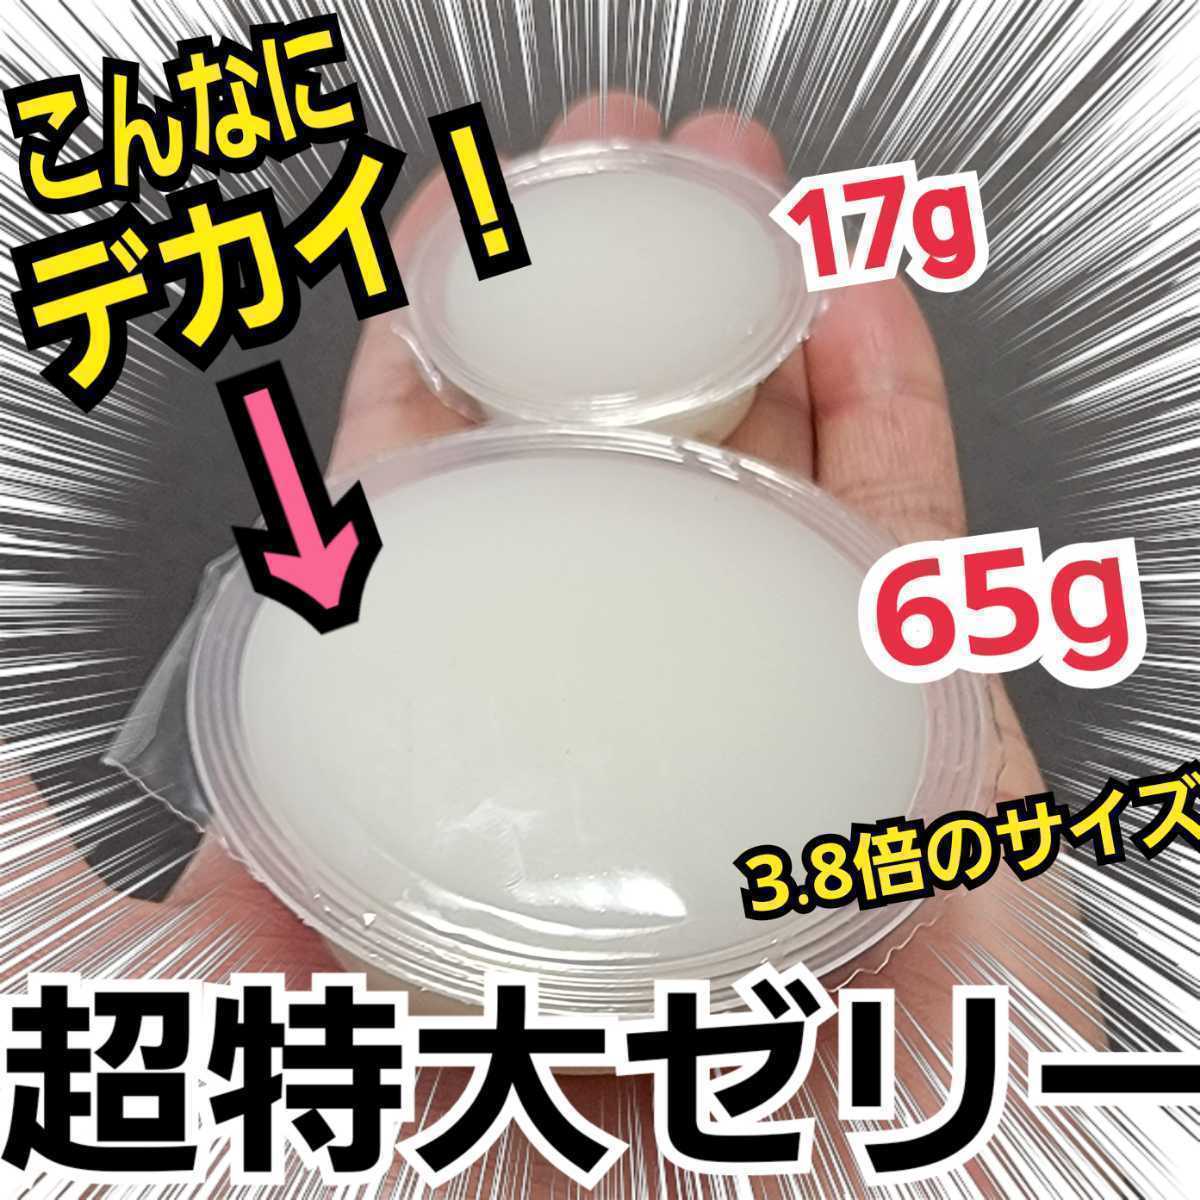  super big size extra-large 65g[50 piece ] high grade rhinoceros beetle jelly ingredient ....... highest peak production egg ..* length .* body power increase . stag beetle jelly 